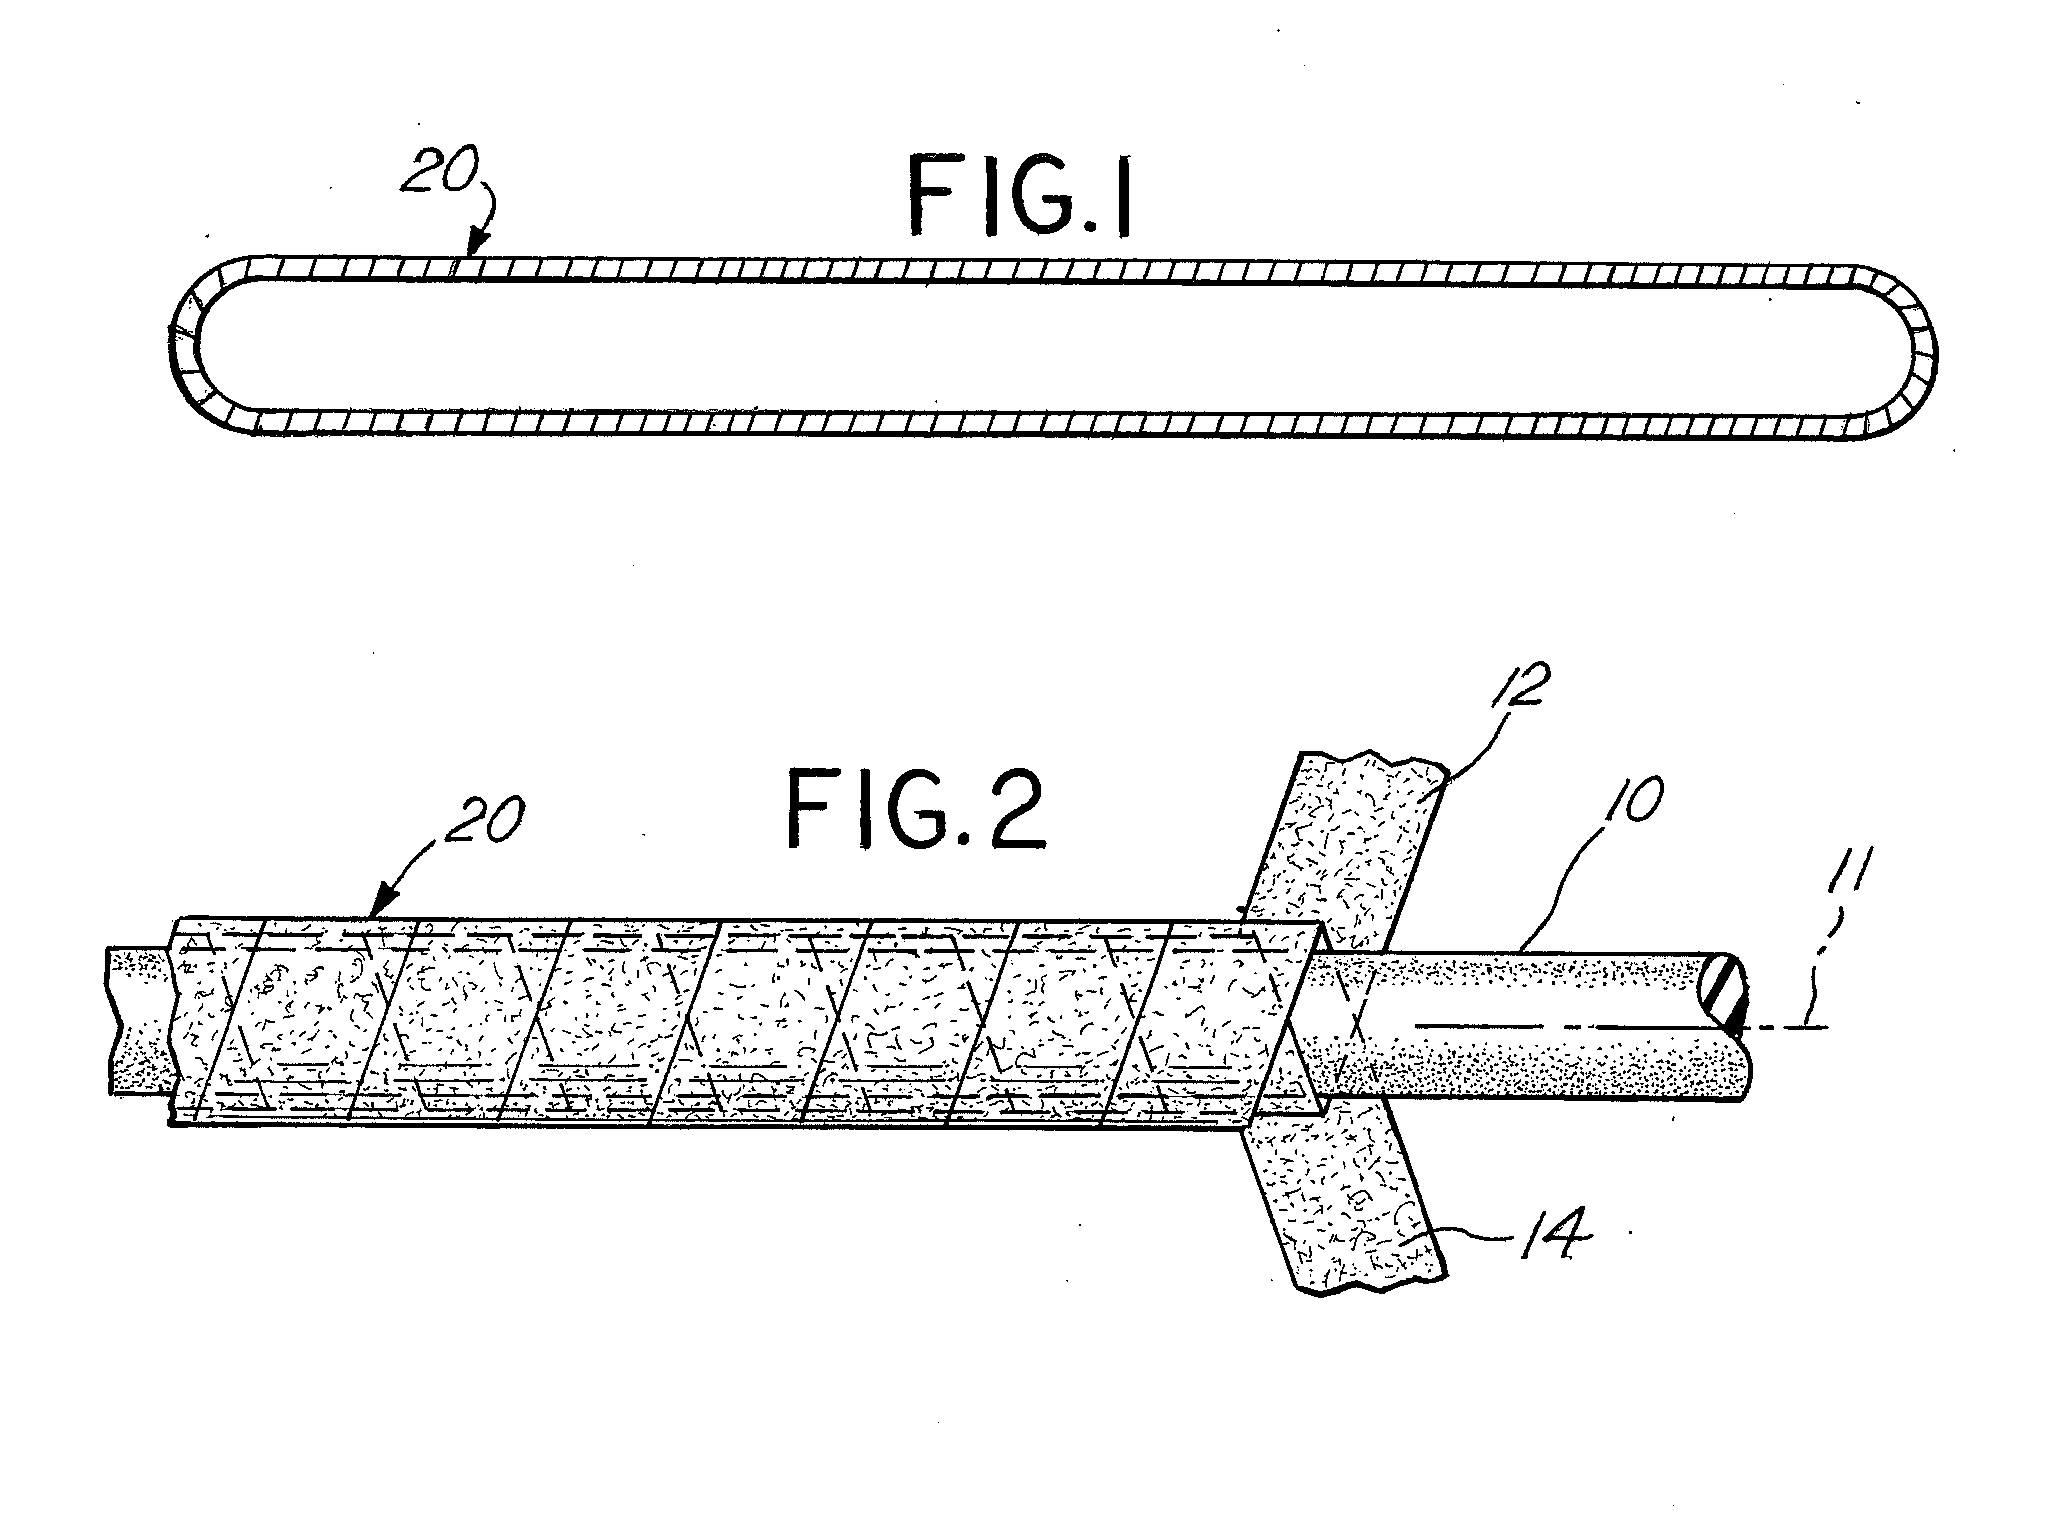 Elastic poultry binder construction and method of use for binding poultry